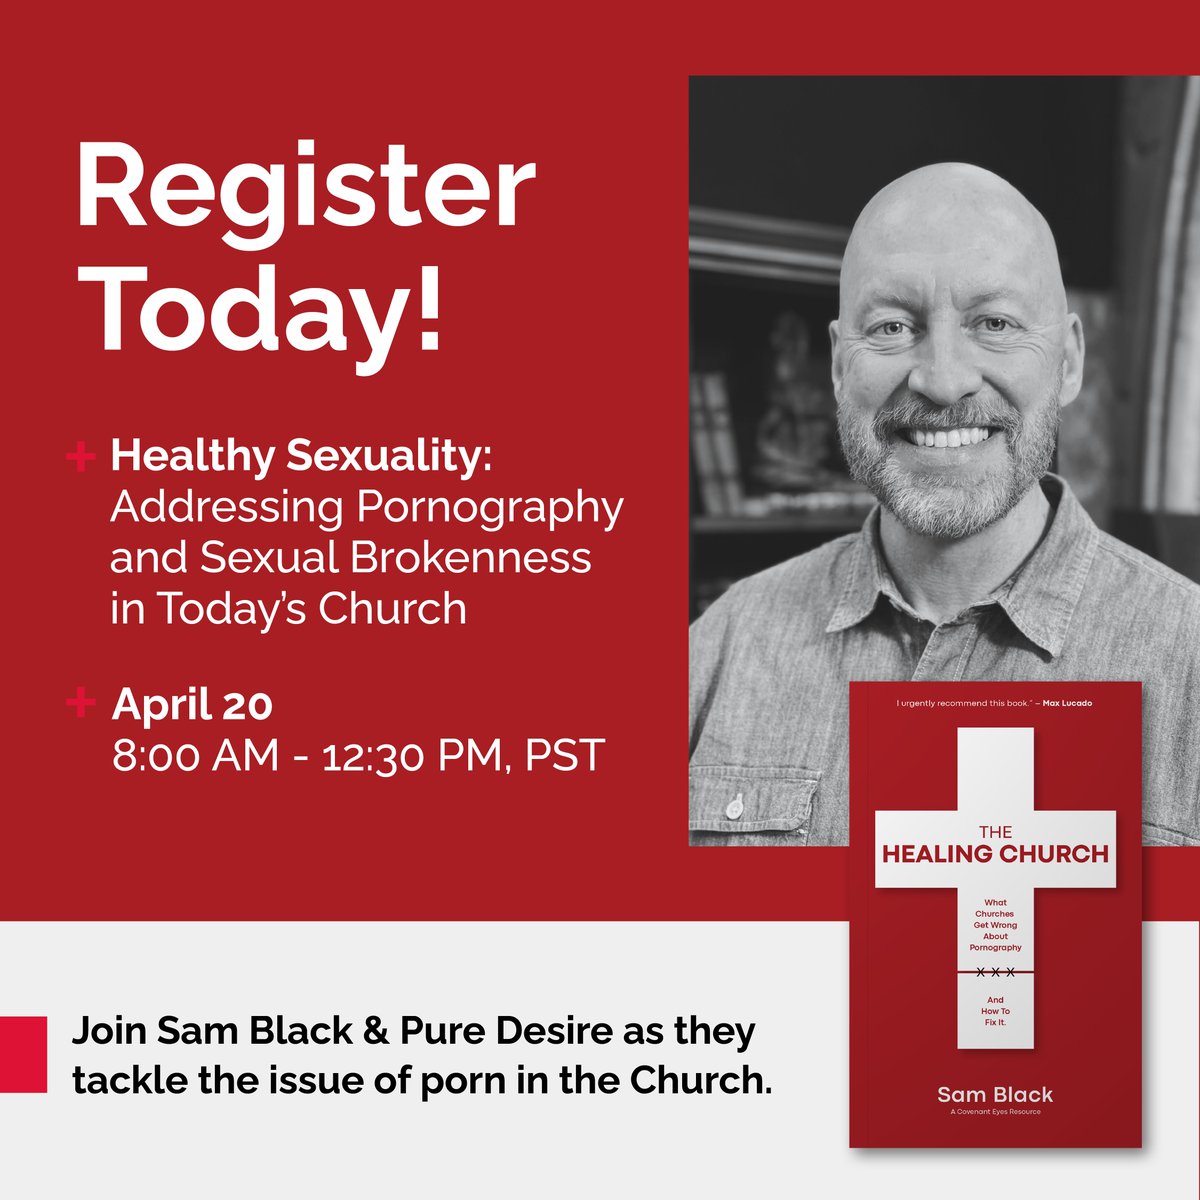 For our California community, Sam Black, author of The Healing Church, wants to invite you to this upcoming event! More details and location at the link. 🔗 cvnteyes.co/3PPfOFz @PureDesirePDMI #churchleaders #thehealingchurch